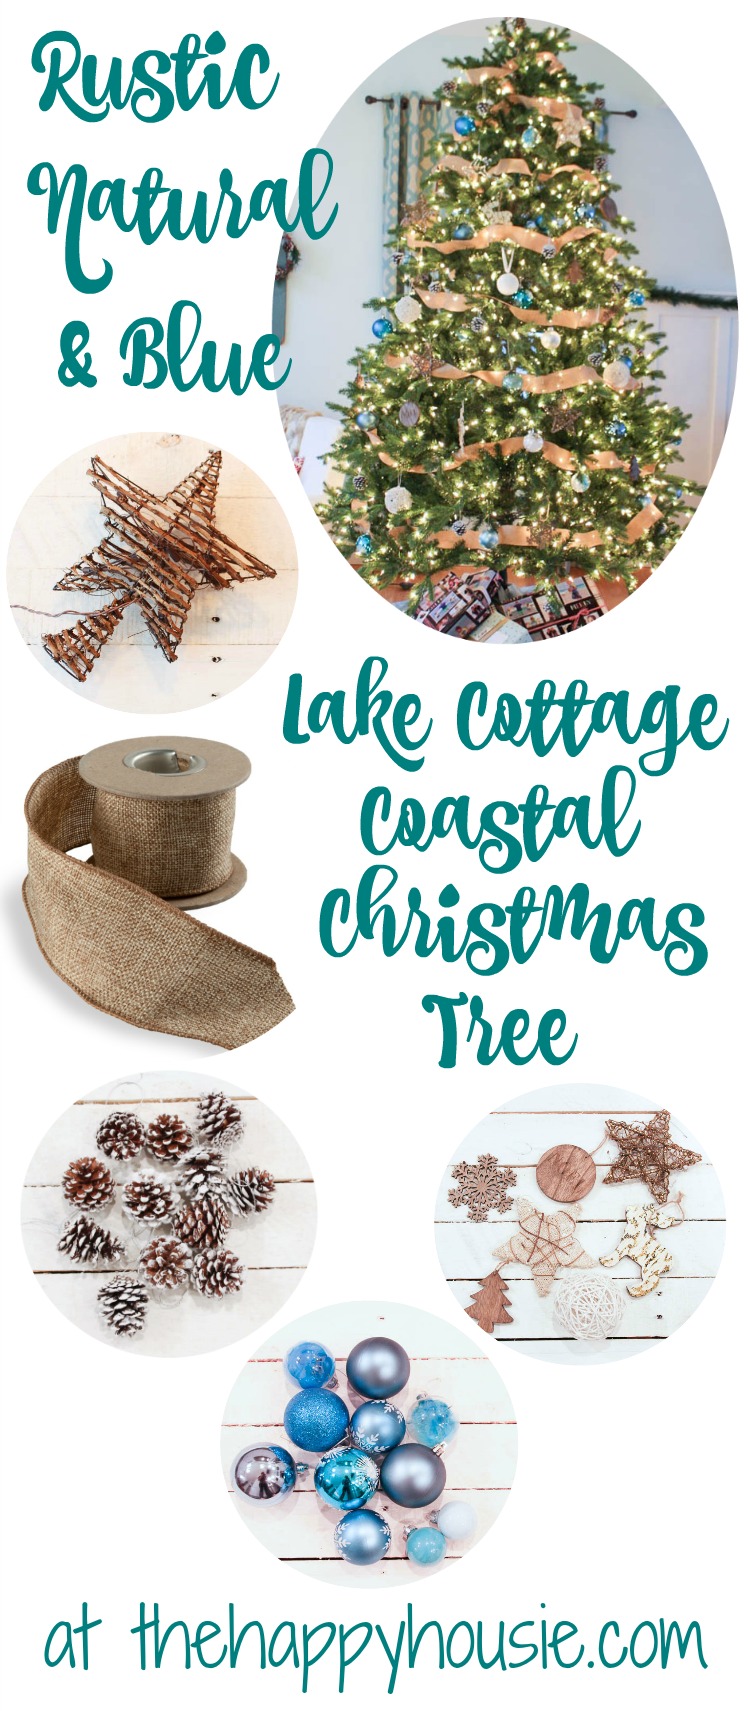 Rustic Natural and Blue Lake Cottage Coastal Christmas Tree Decor at thehappyhousie.com